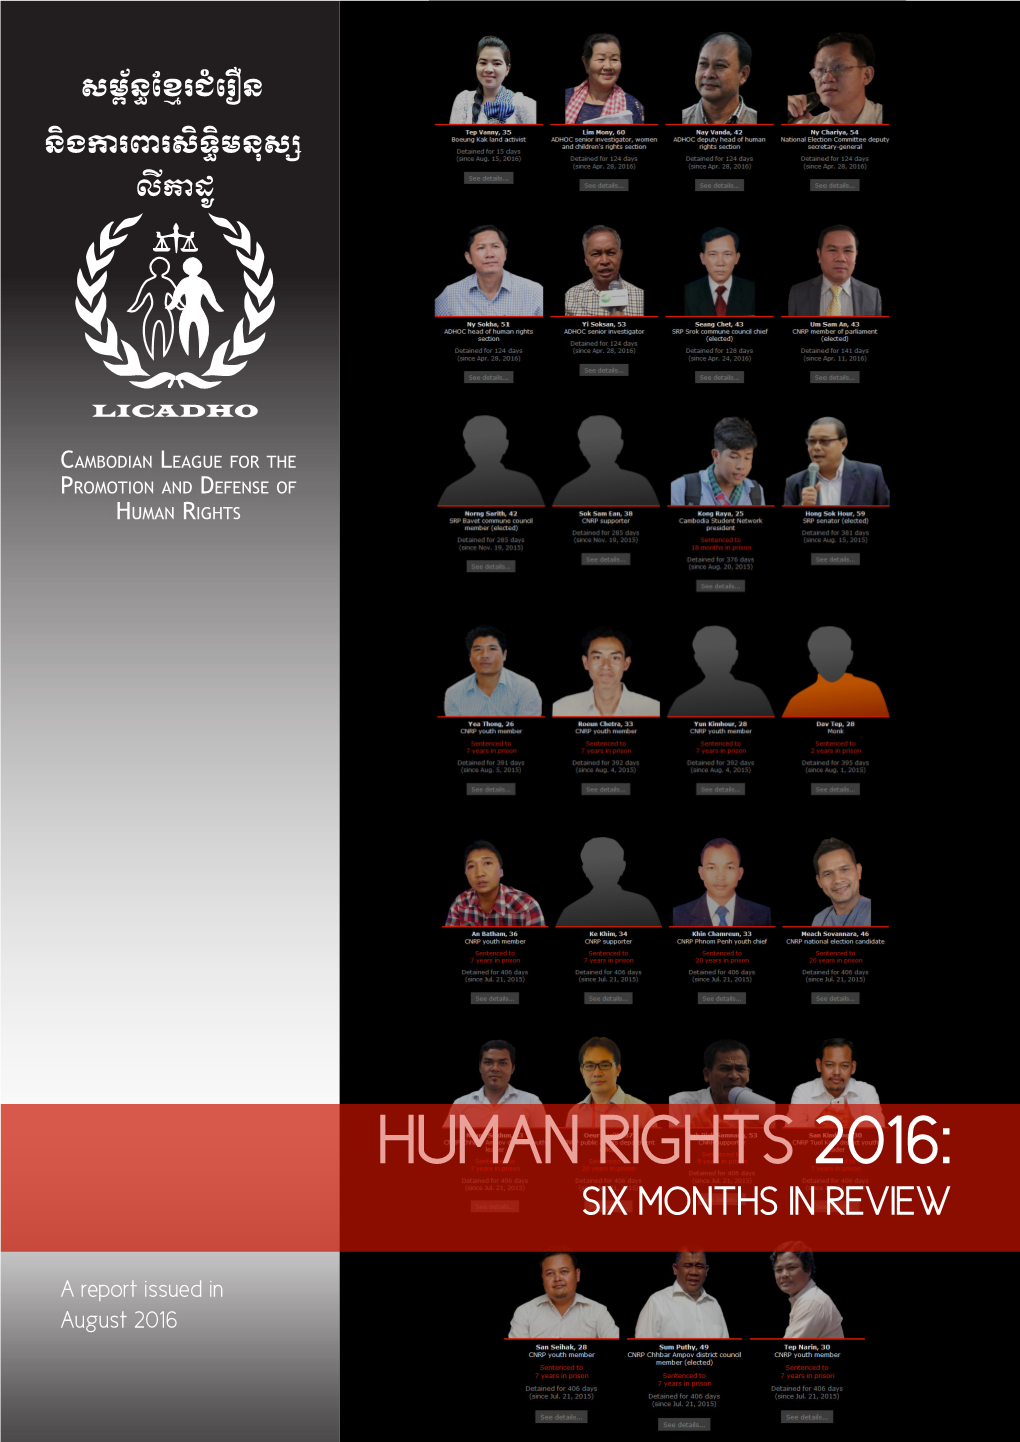 Human Rights 2016: Six Months in Review